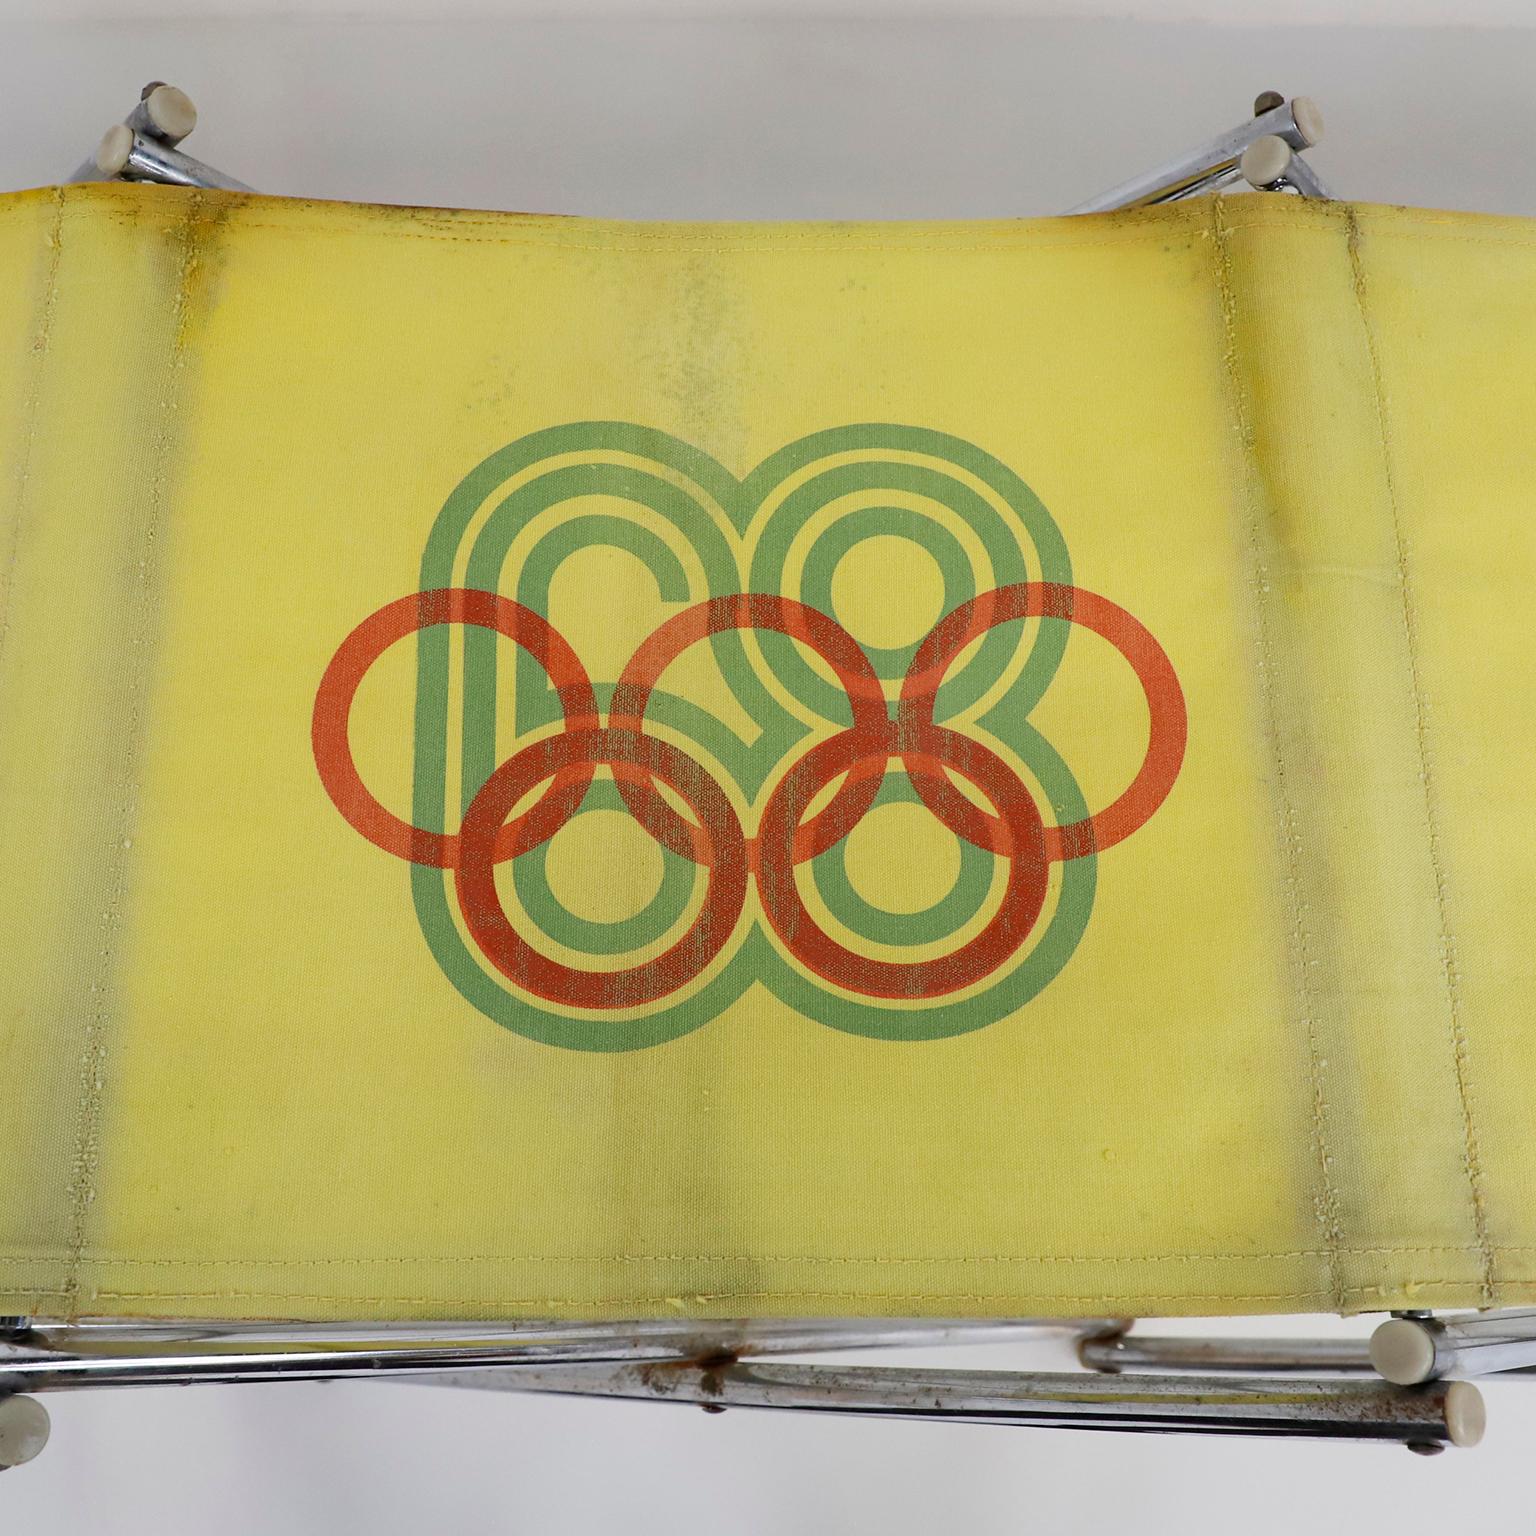 Mid-Century Modern Original Vintage Olympic Folding Bench Mexico 68 with Graphic Design Lines Logo